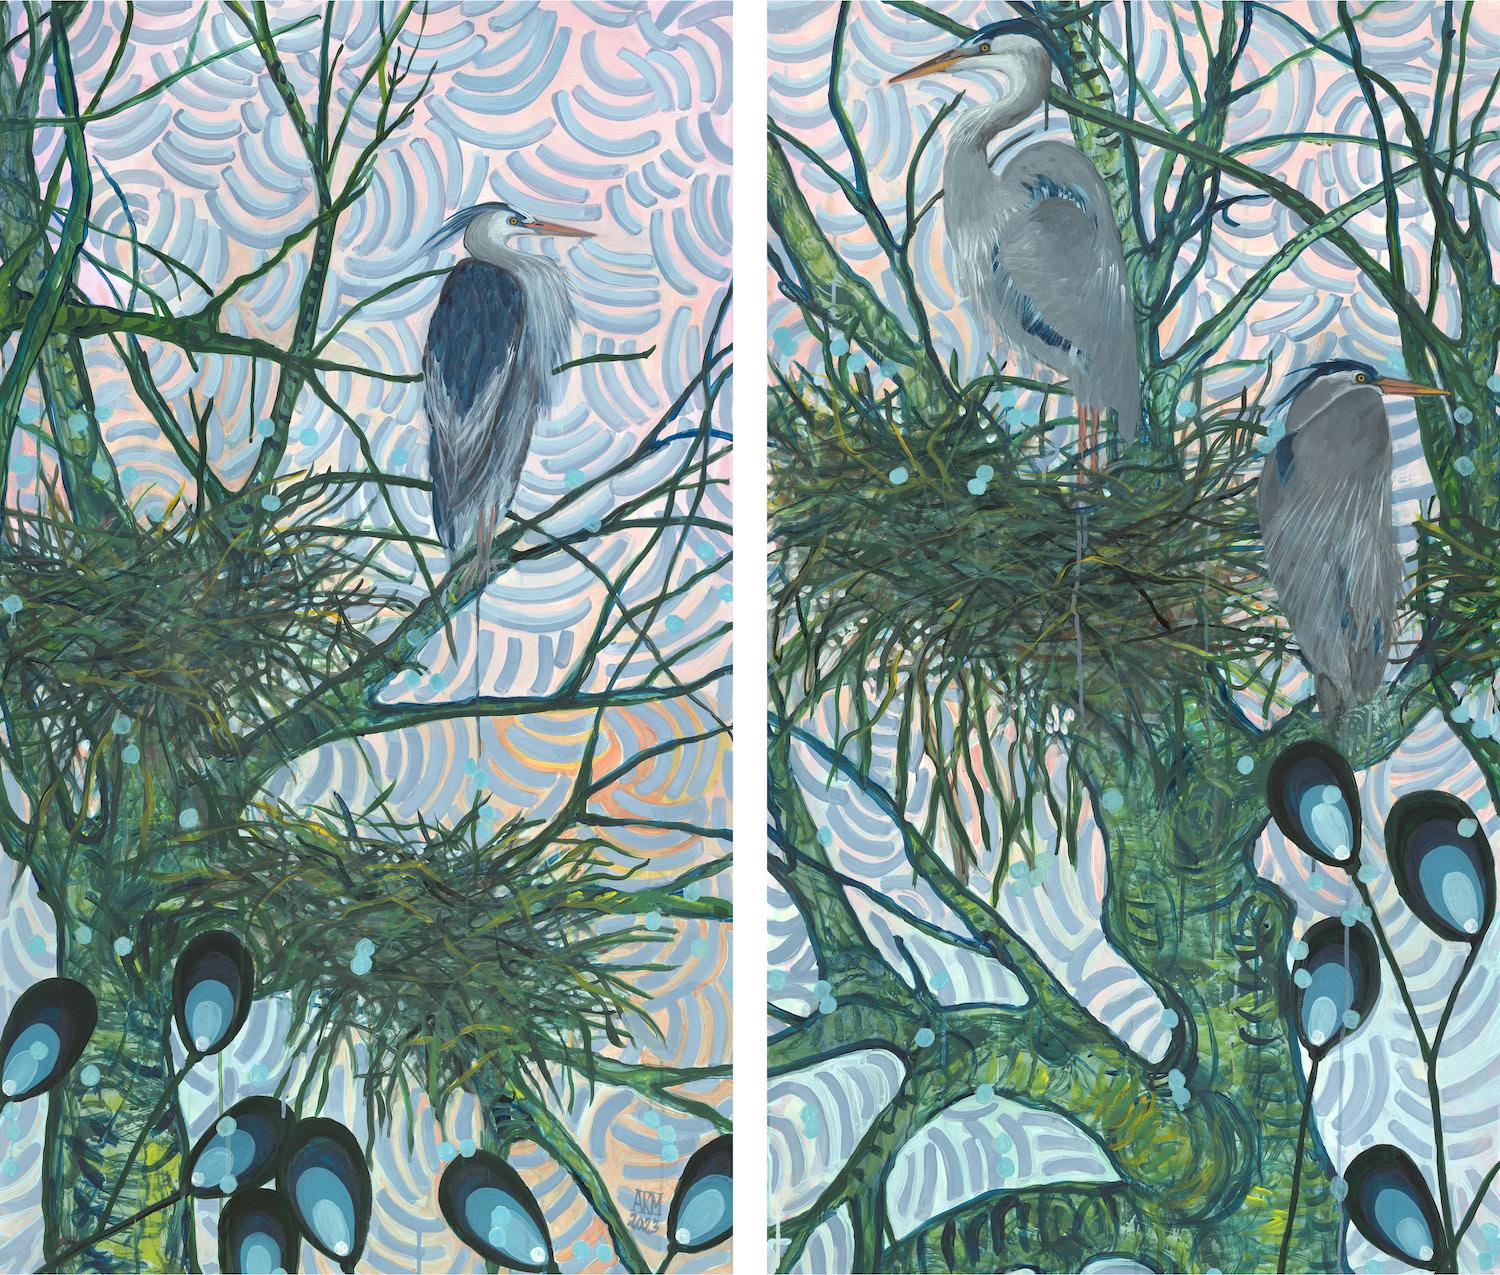  Large Nature Diptych Heron Rookery Watercolor & Acrylic on Mylar Greens, Blues 